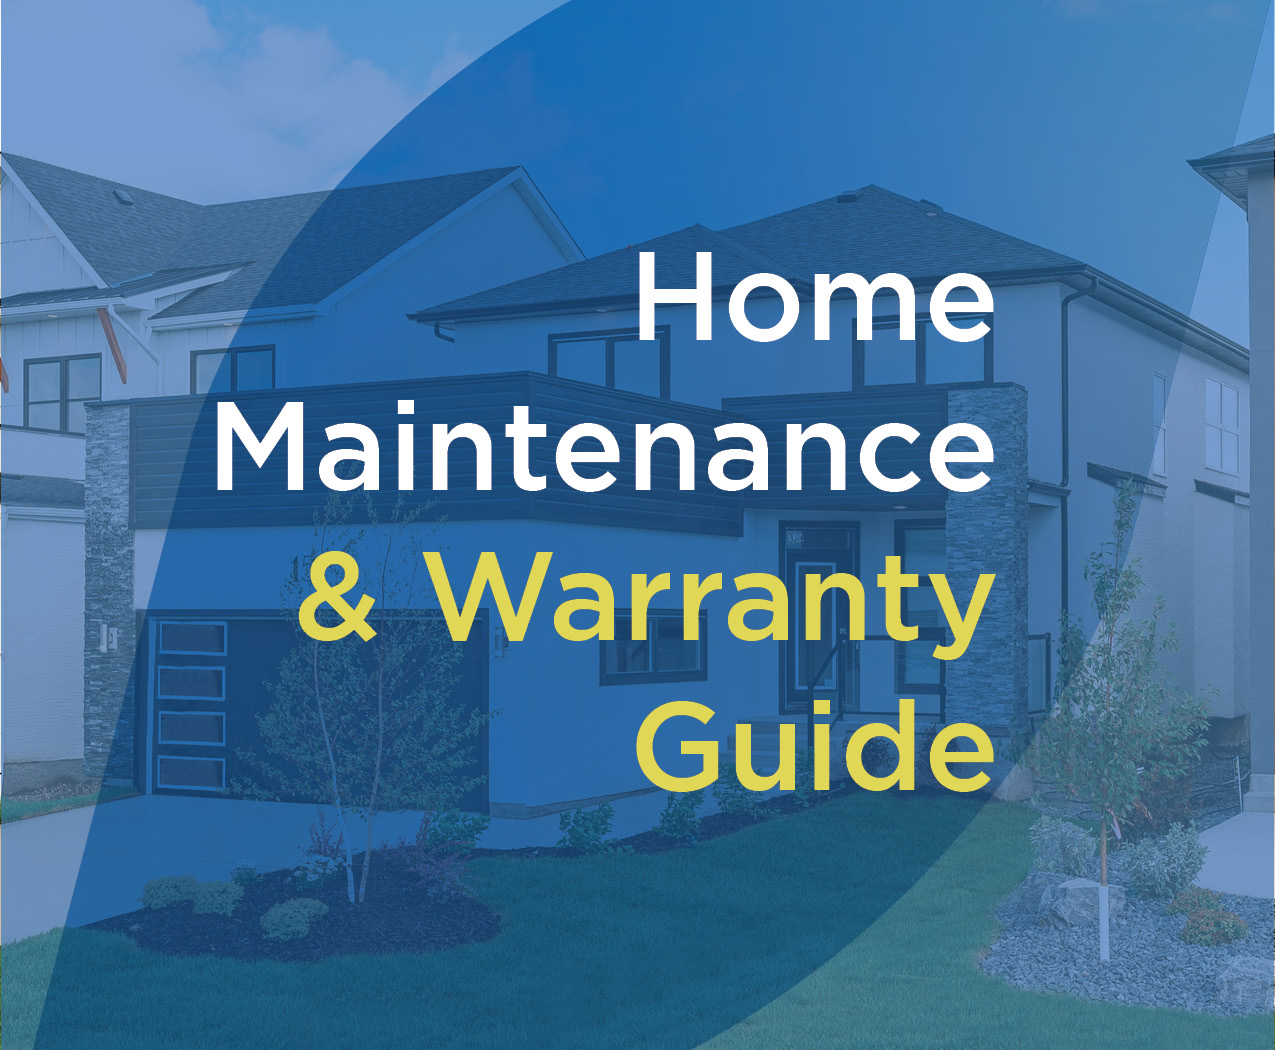 Home Maintenance and Warranty Guide